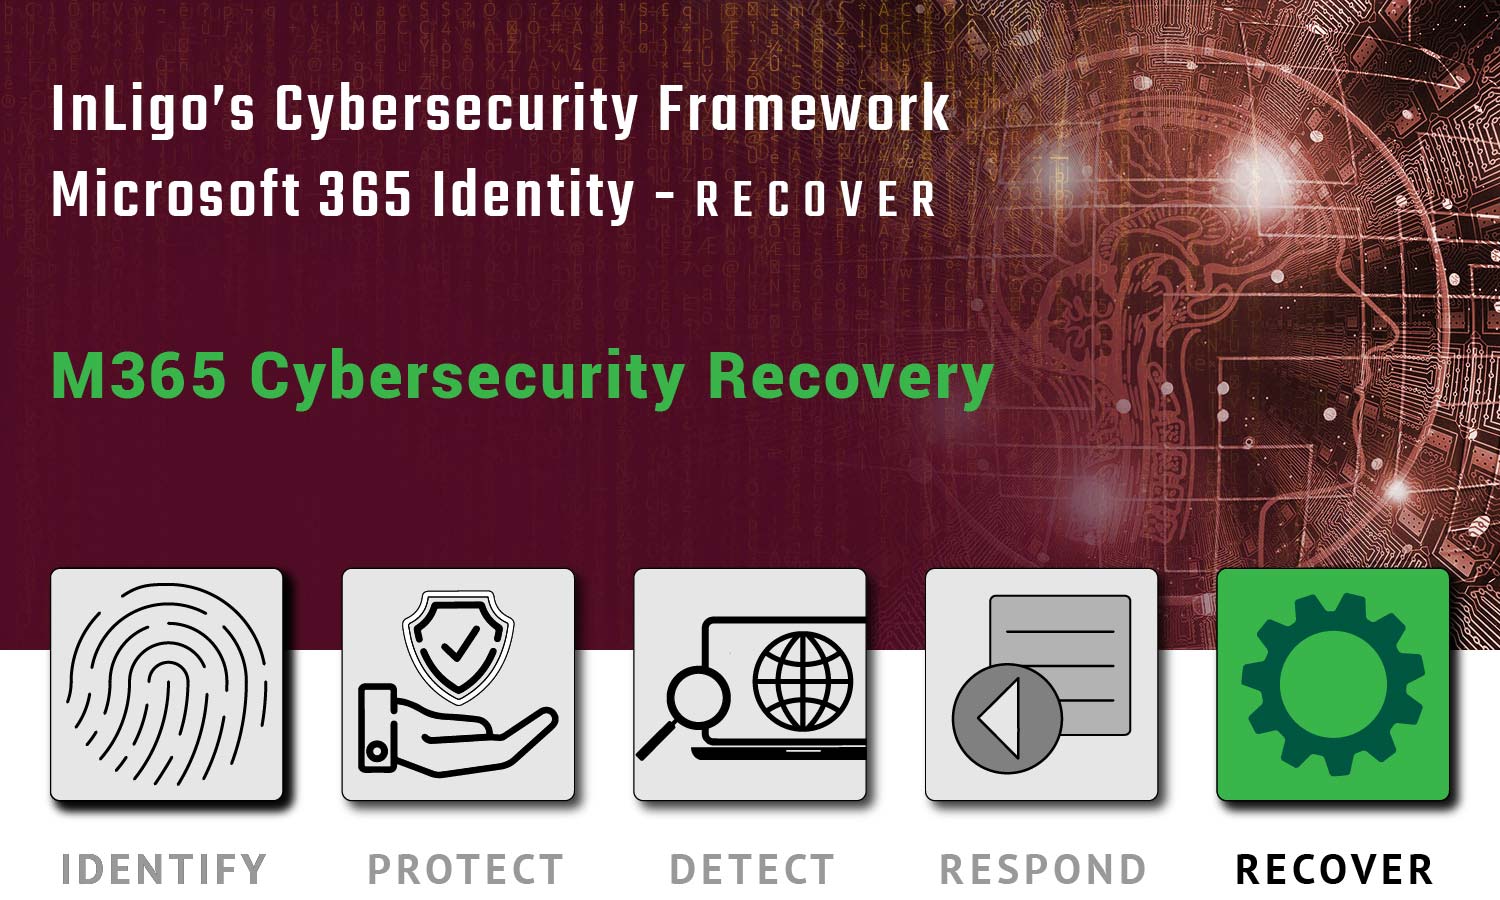 M365 Cybersecurity Recovery